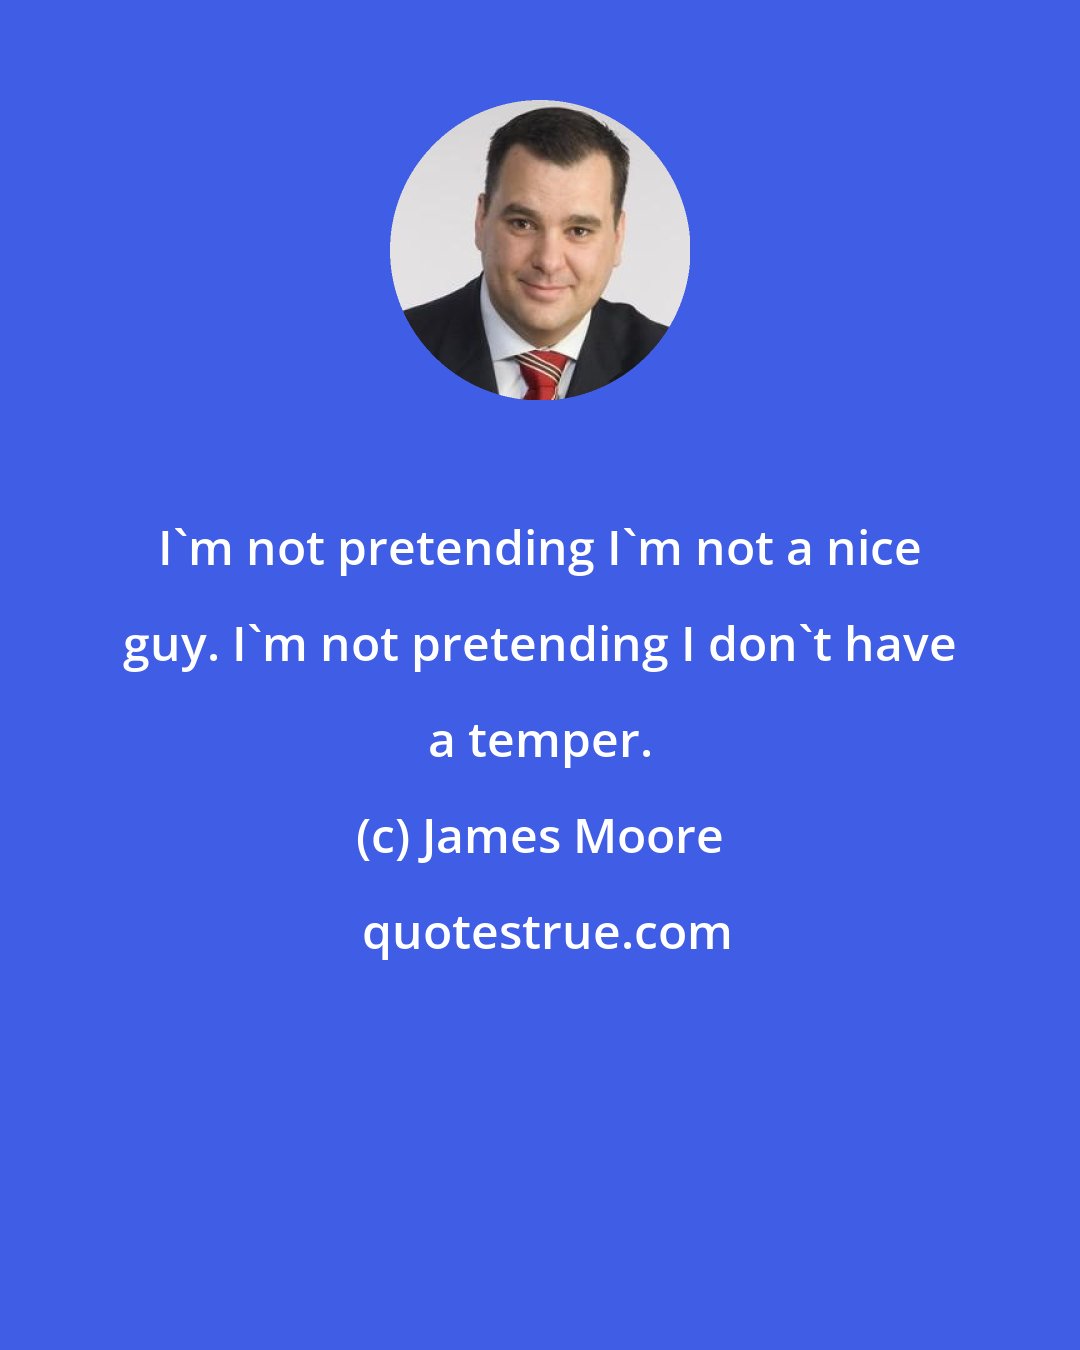 James Moore: I'm not pretending I'm not a nice guy. I'm not pretending I don't have a temper.